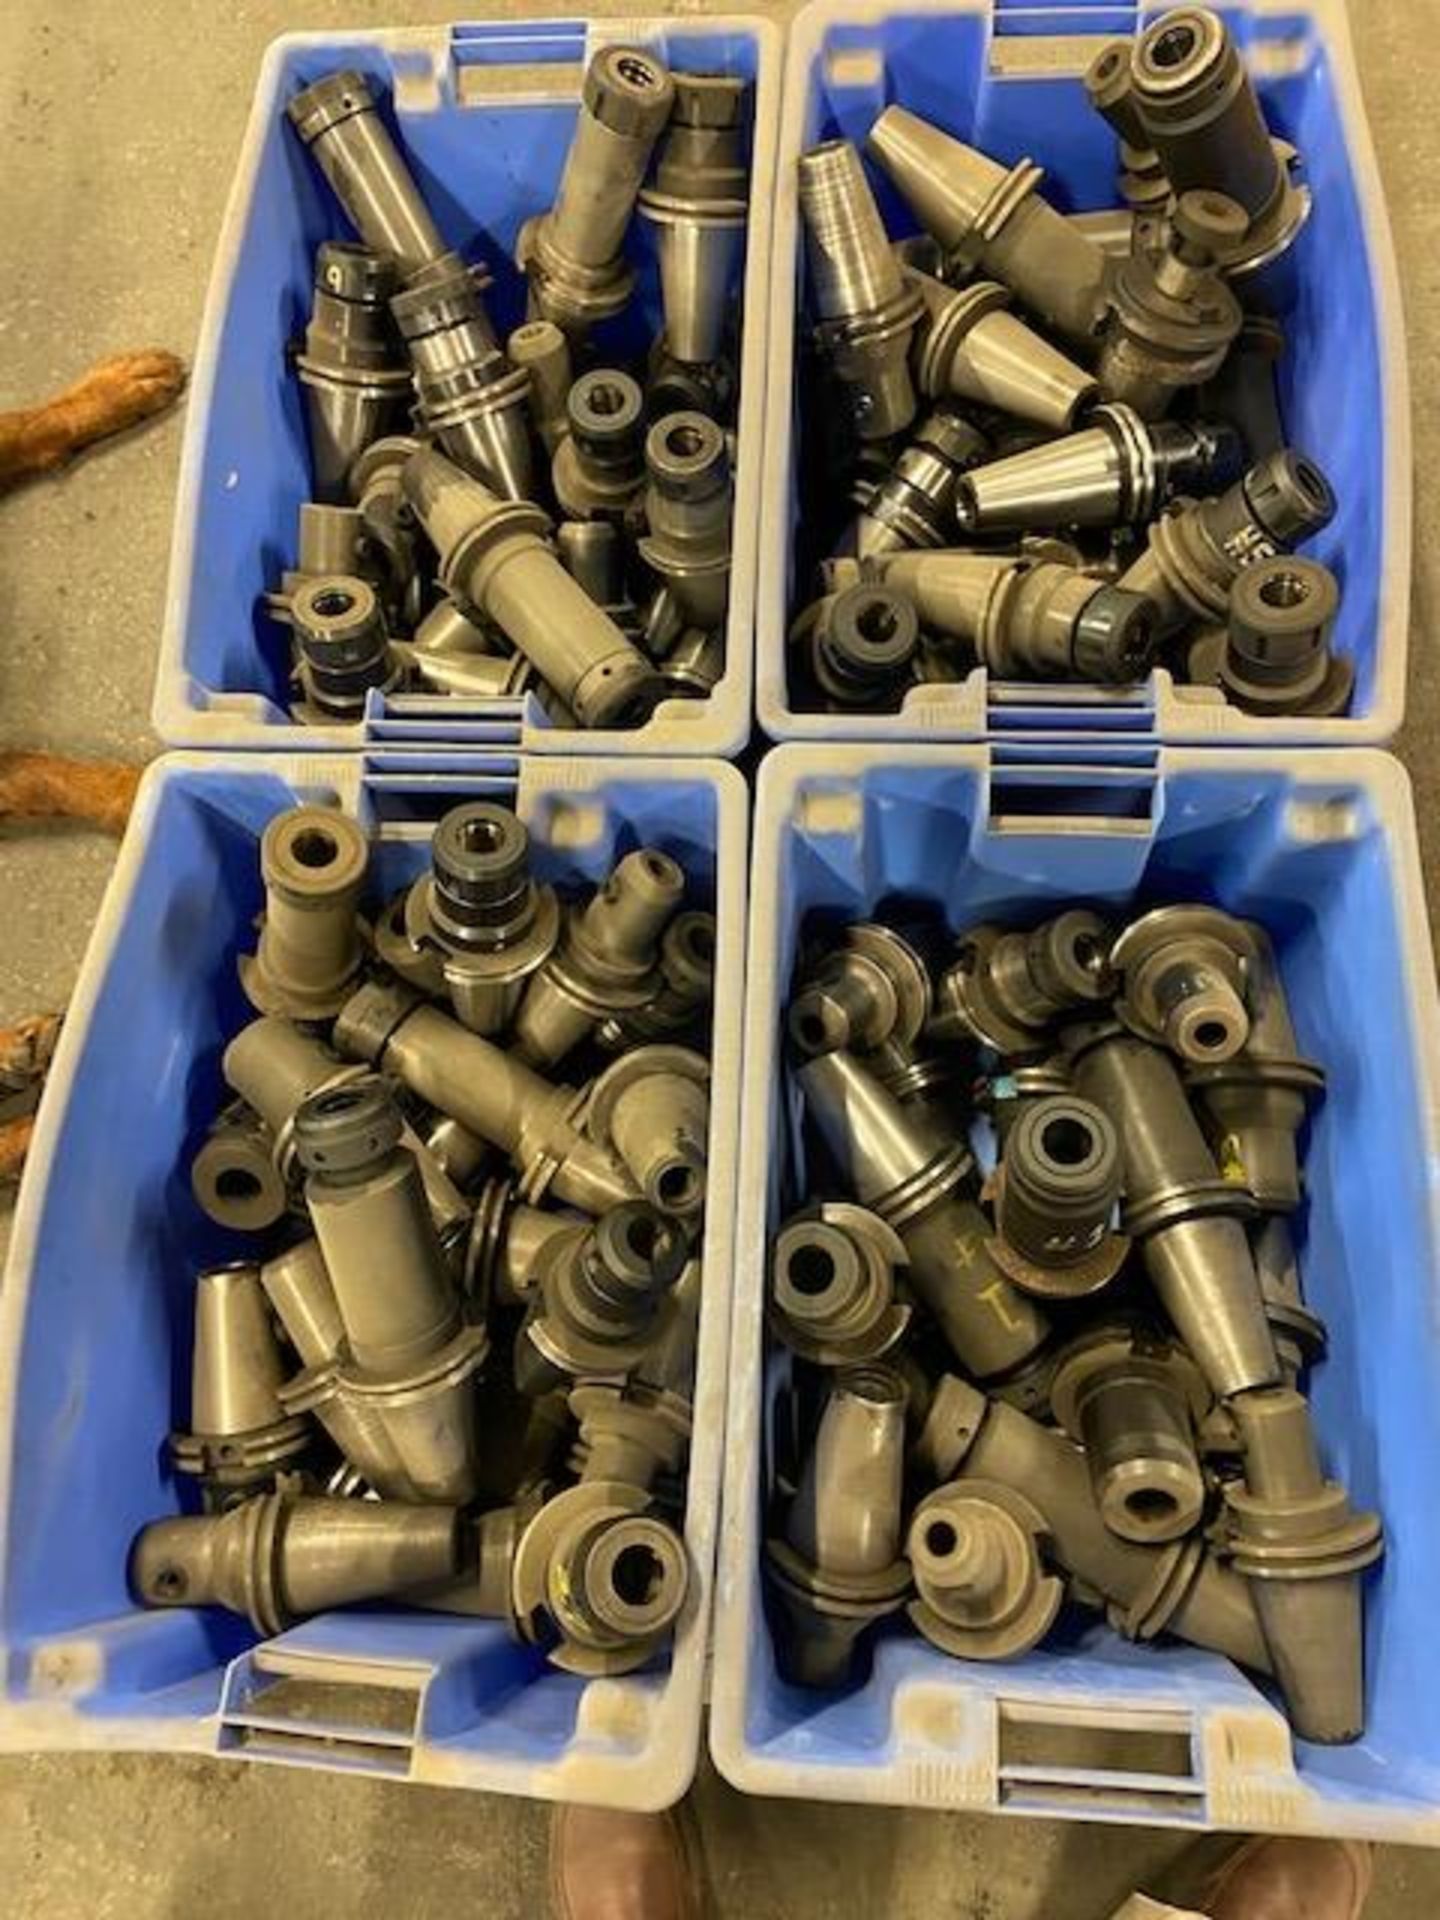 Large Lot of MINT CAT50 Tooling HUGE LOT approximately 100 units